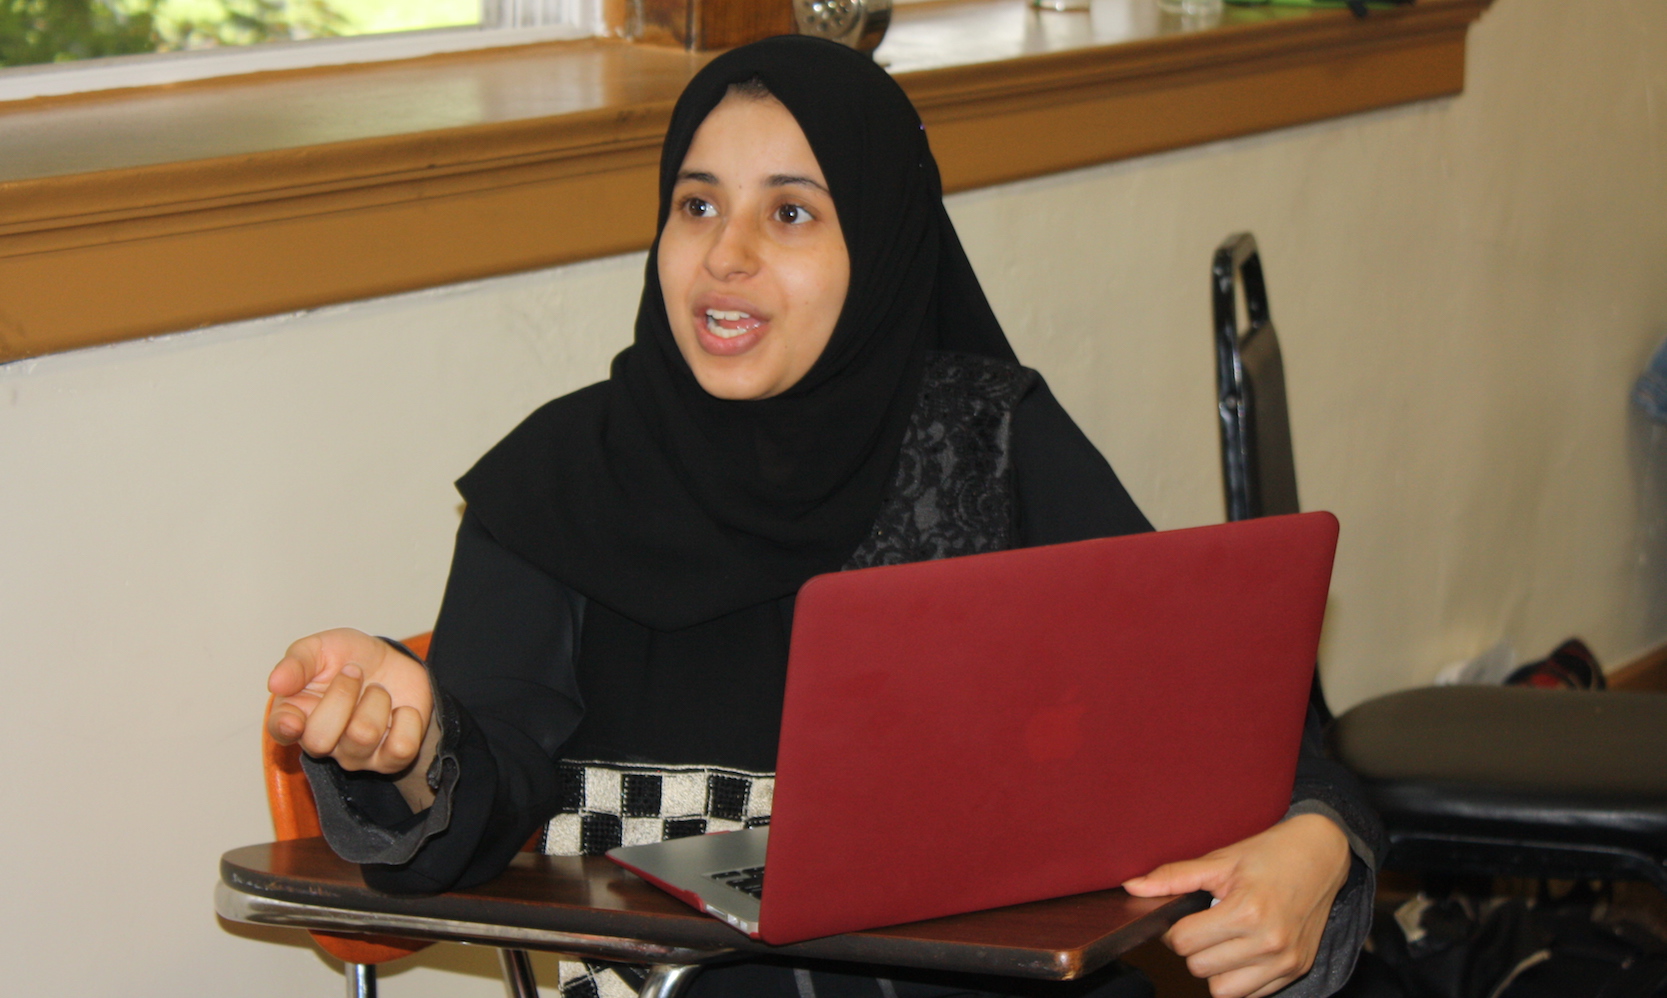 Karima Alwishah speaks to the EHRA academy students about her experience.